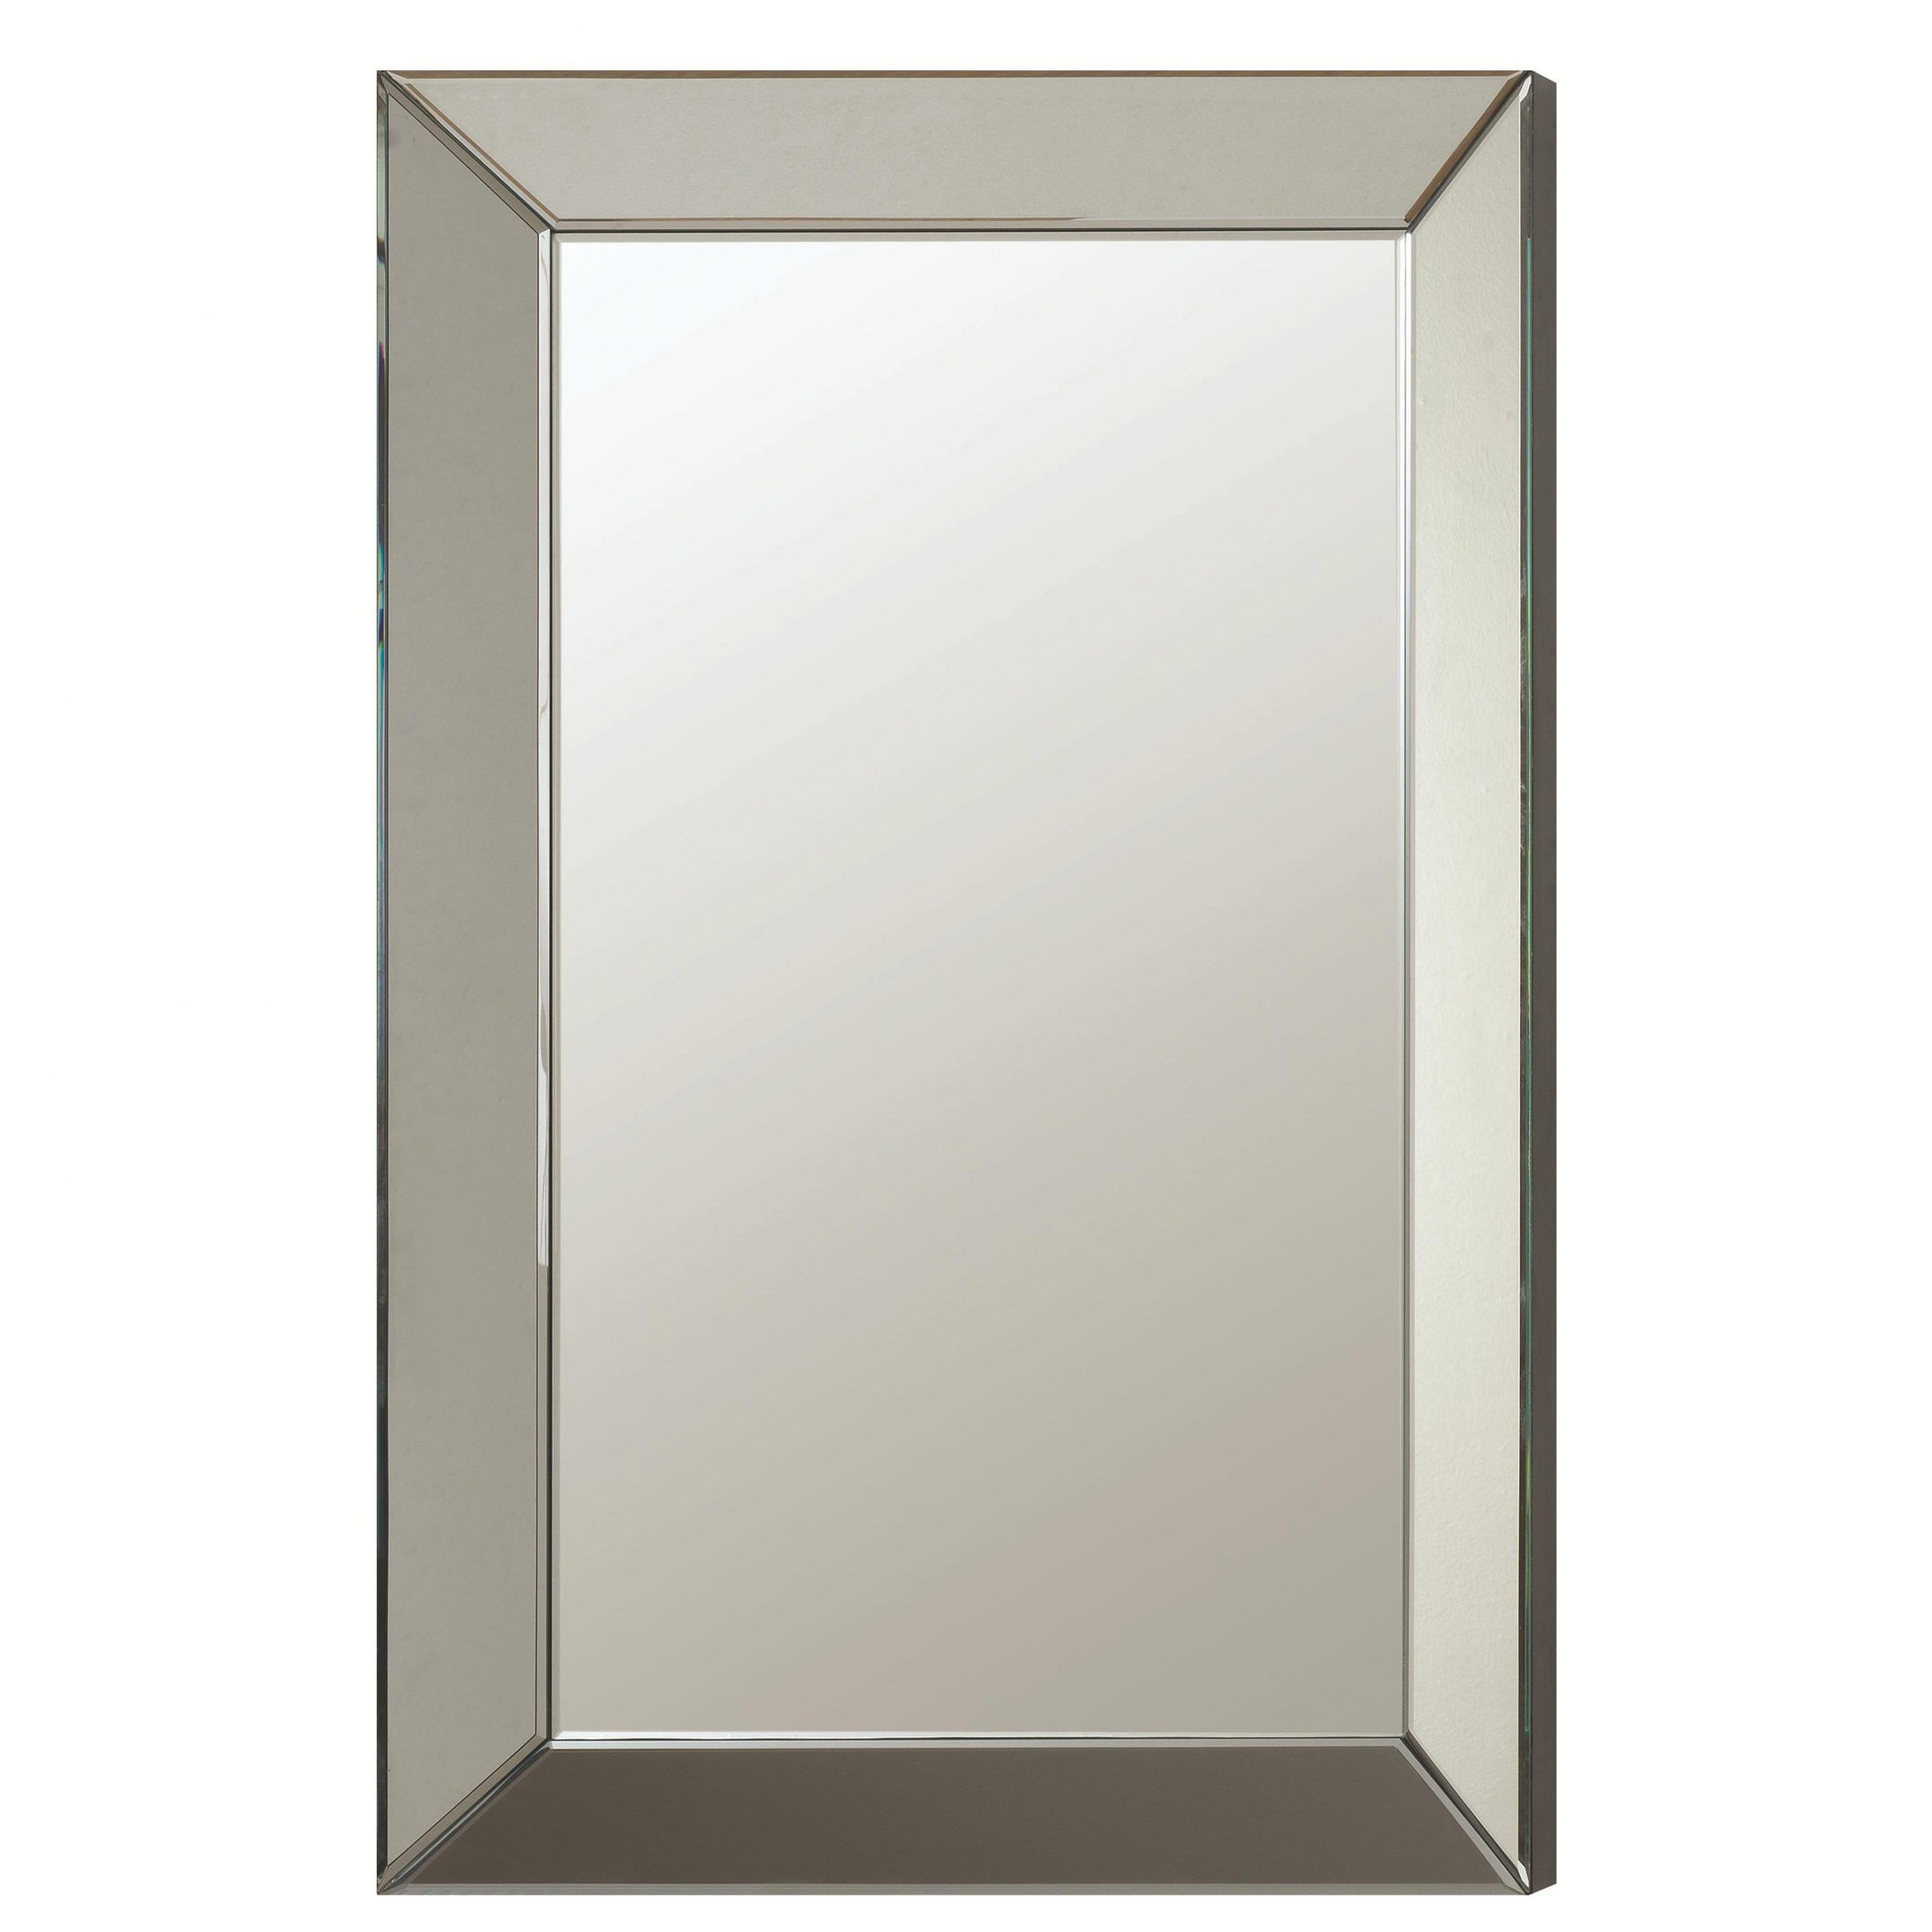 Coaster Accent Mirrors Contemporary Frameless Beveled Mirror | A1 For Cut Corner Frameless Beveled Wall Mirrors (View 1 of 15)